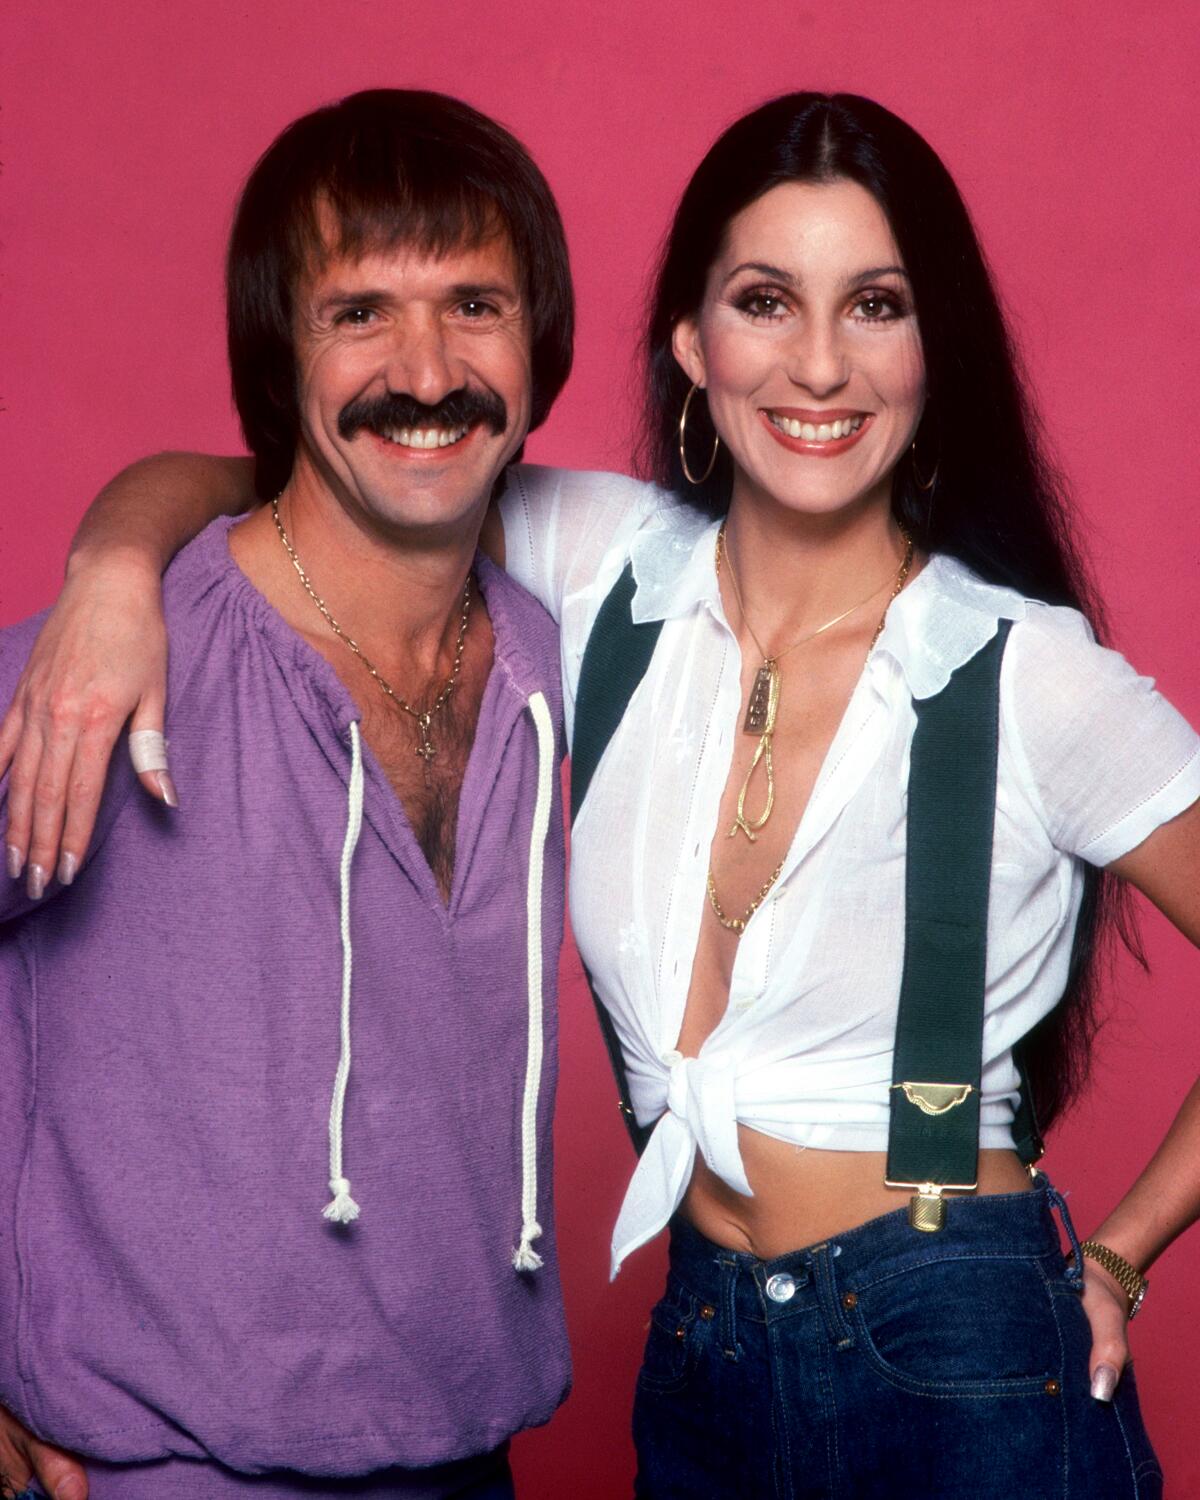 A man with long hair and a mustache in a purple top and a woman with long hair in a white top with suspenders